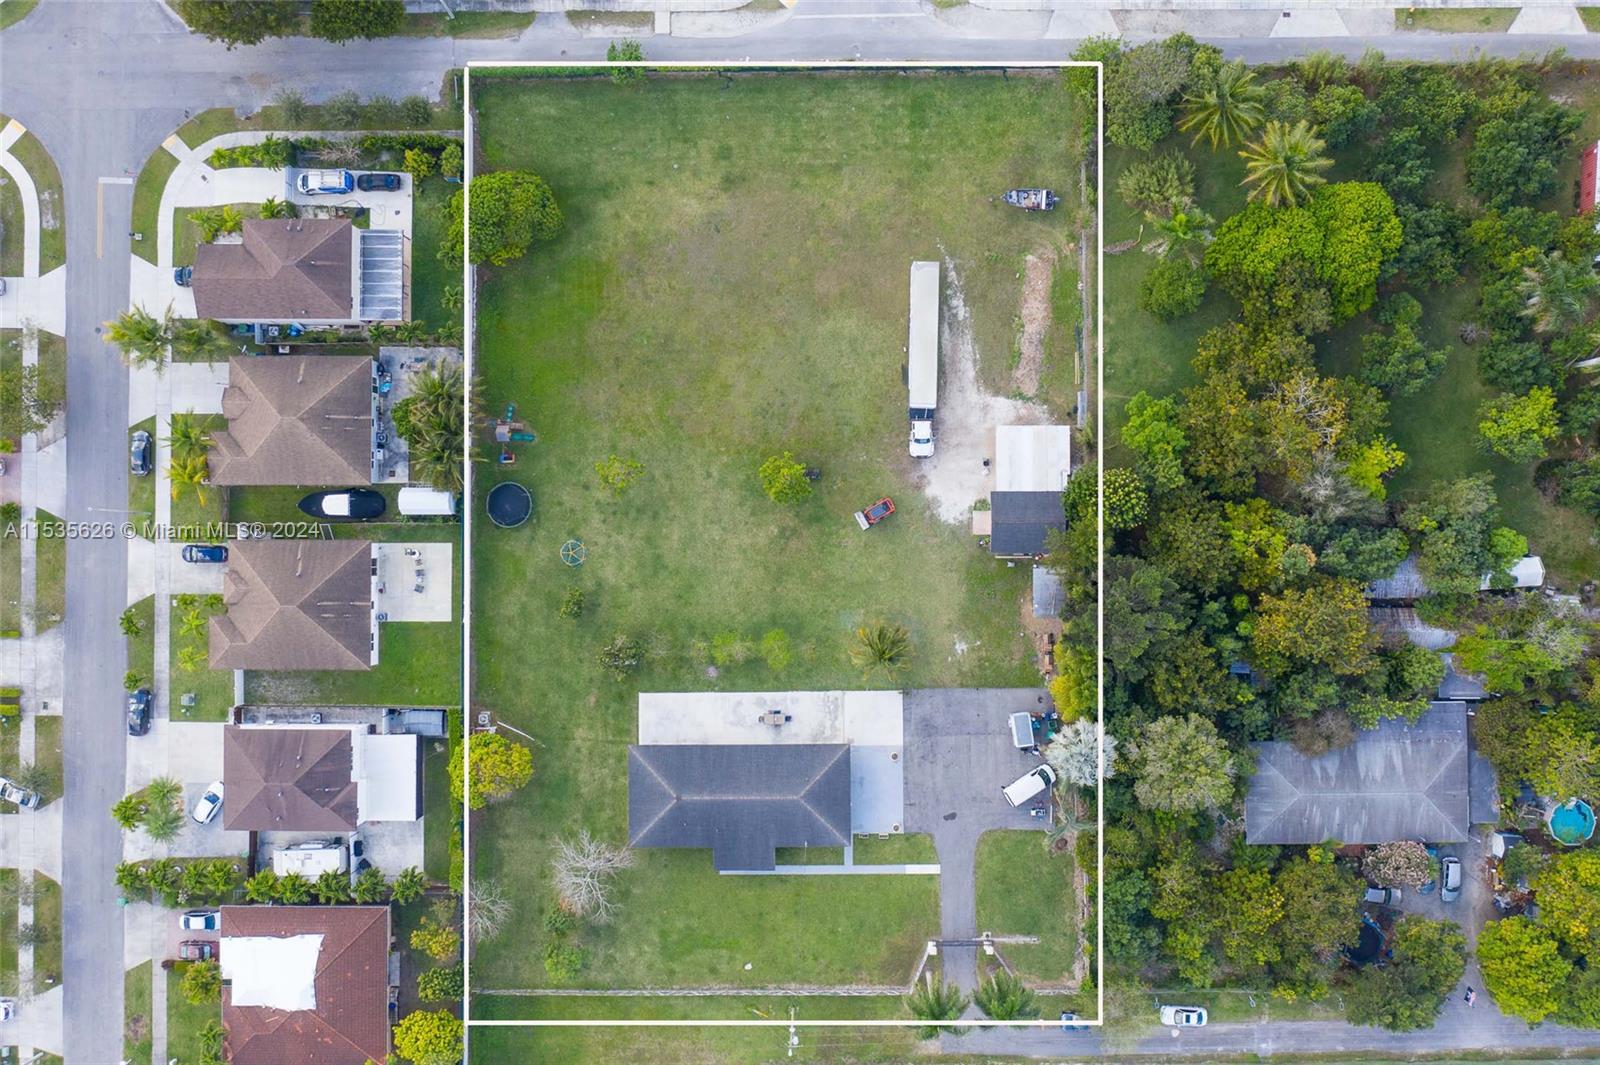 an aerial view of residential house with outdoor space and street view